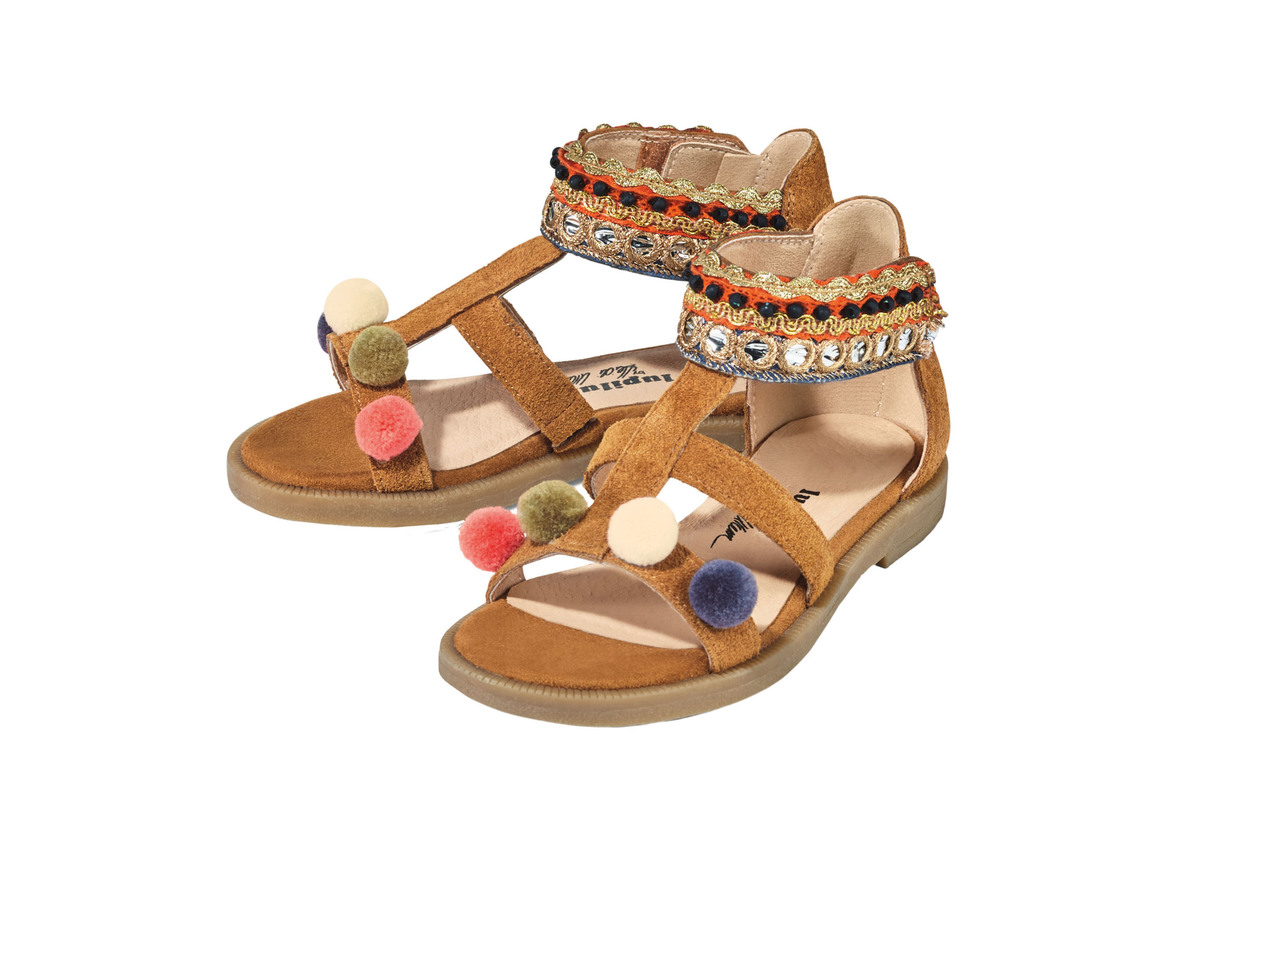 Girls' Leather Sandals